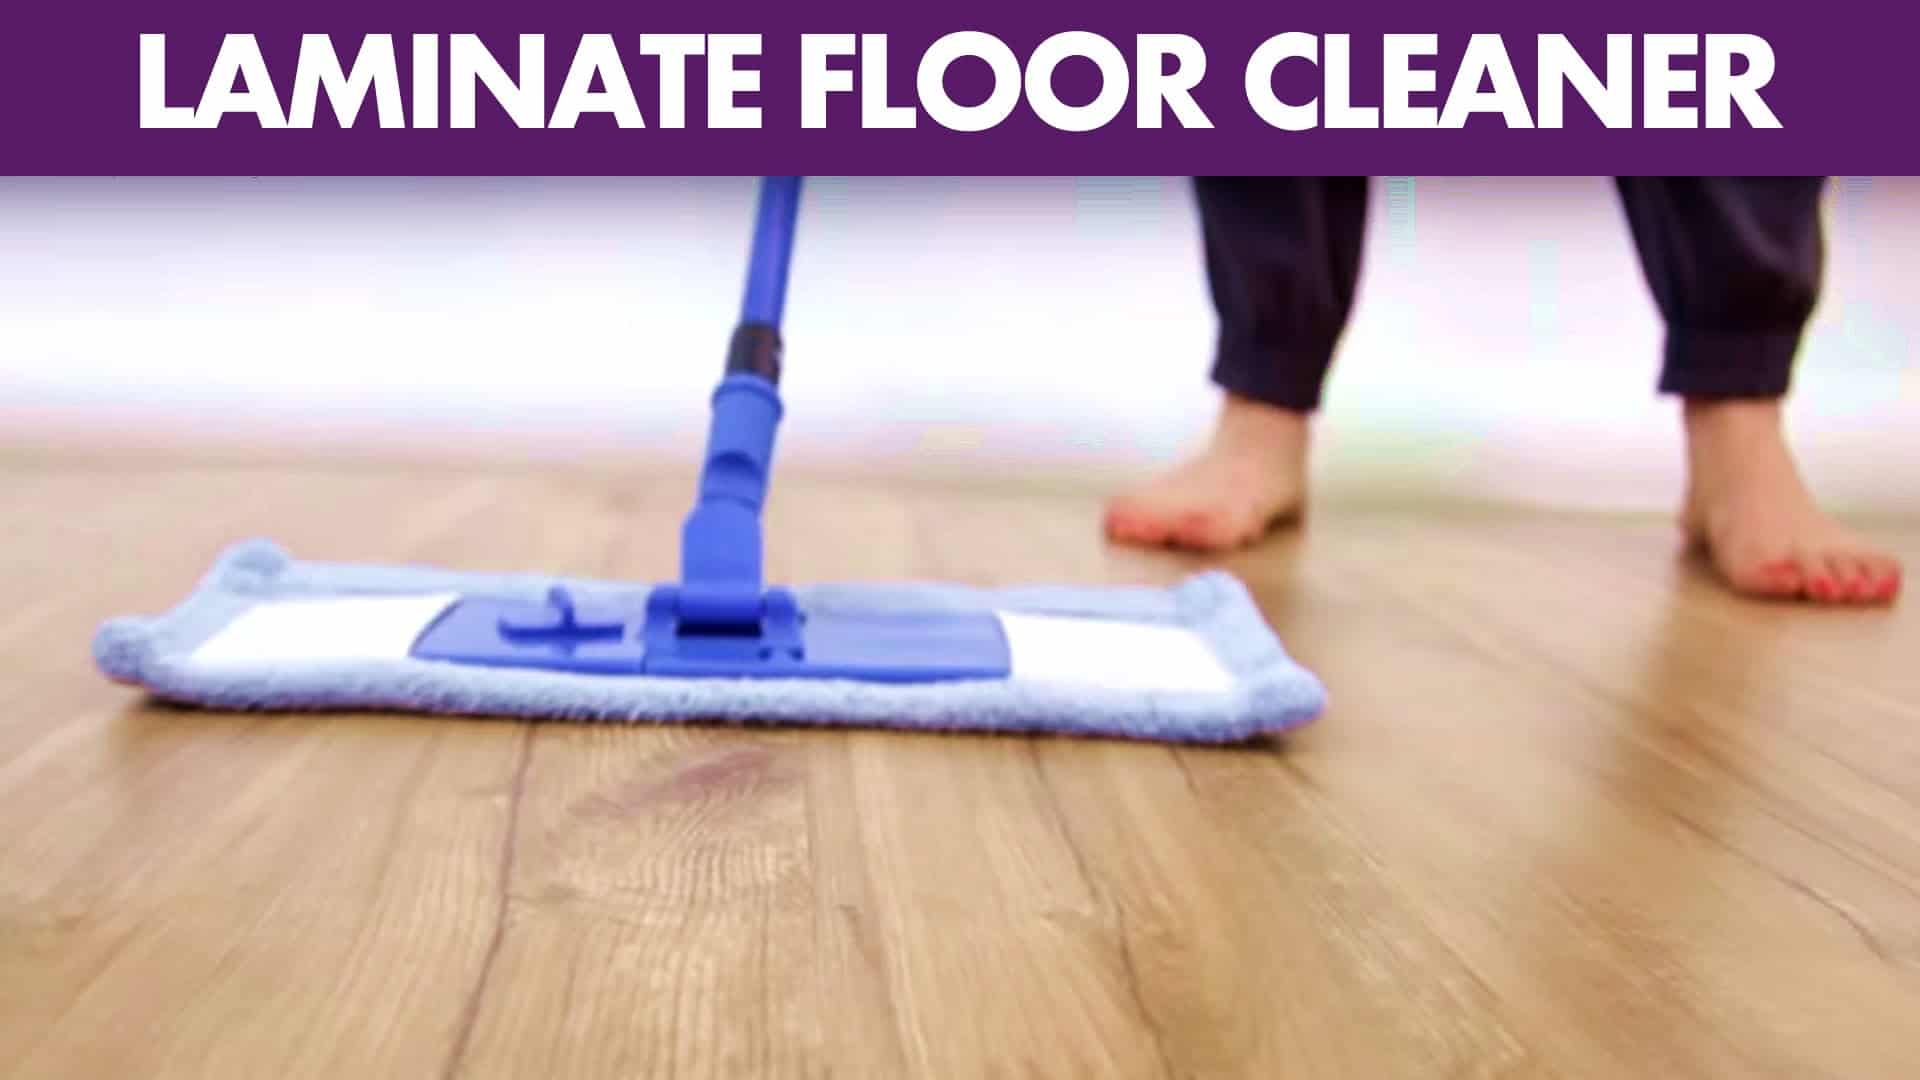 Laminate Floor Cleaner Day 9 31, How To Clean And Polish Laminate Floors